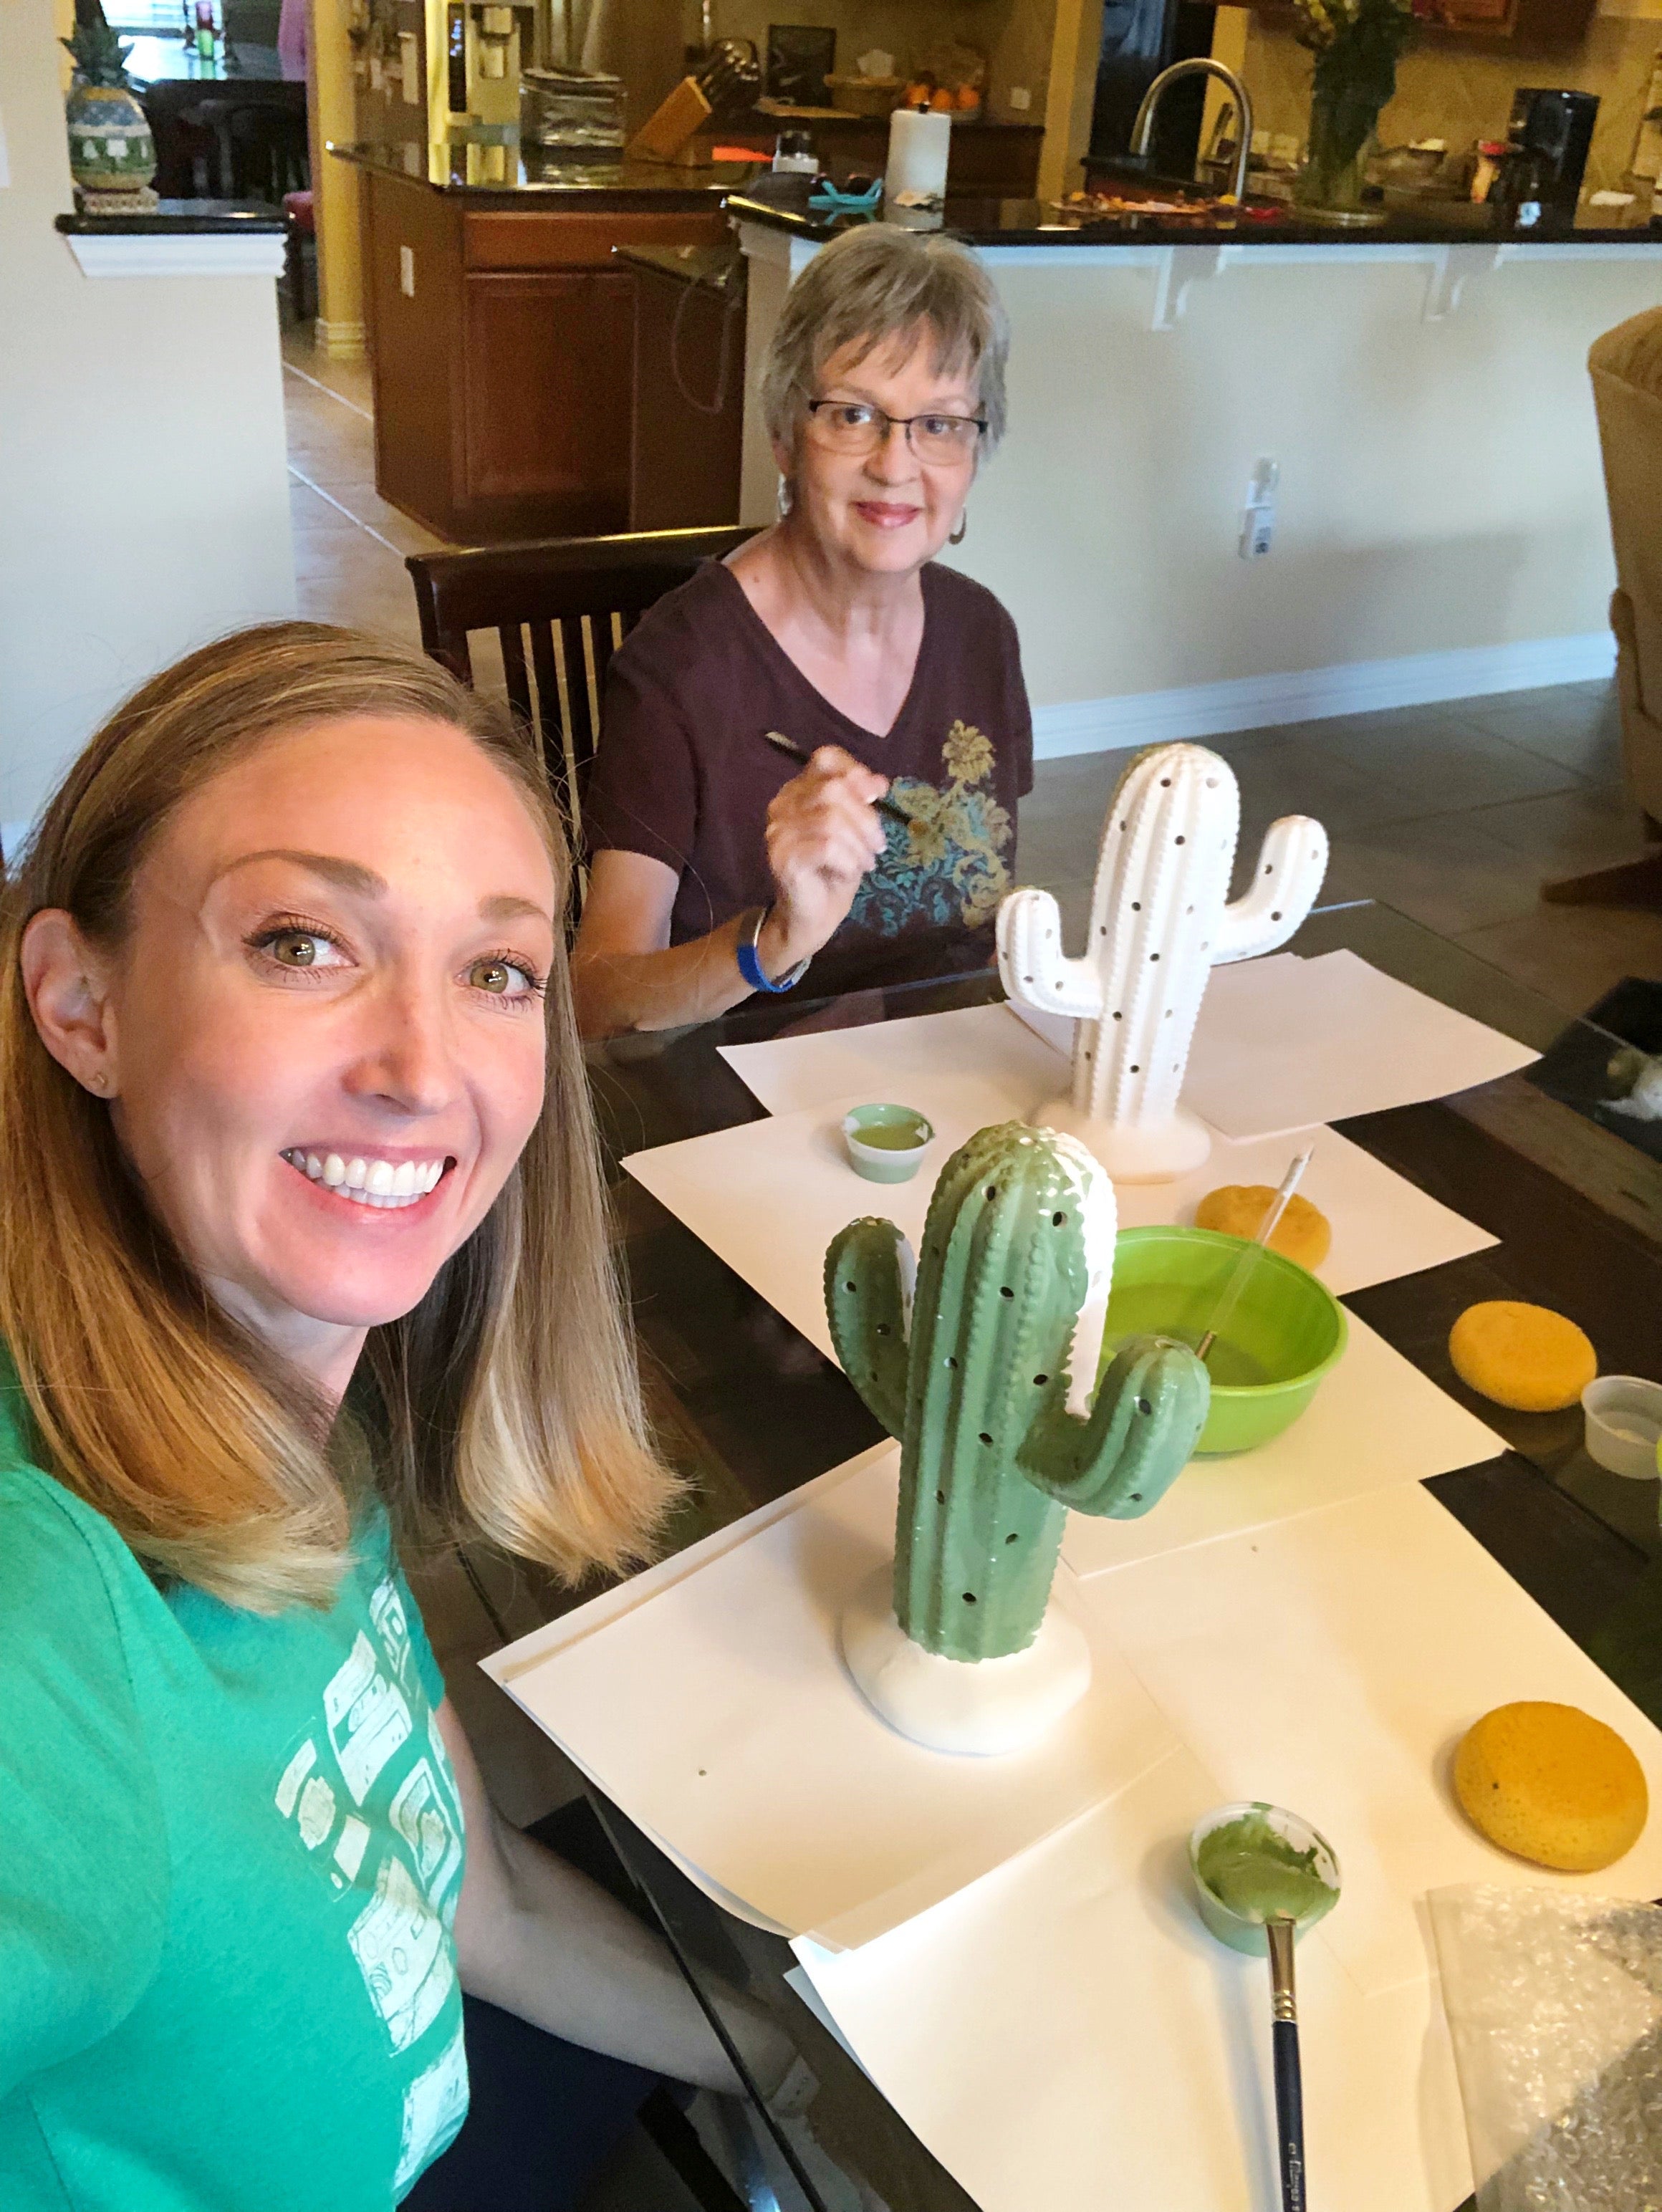 Me and Mom painting cactus